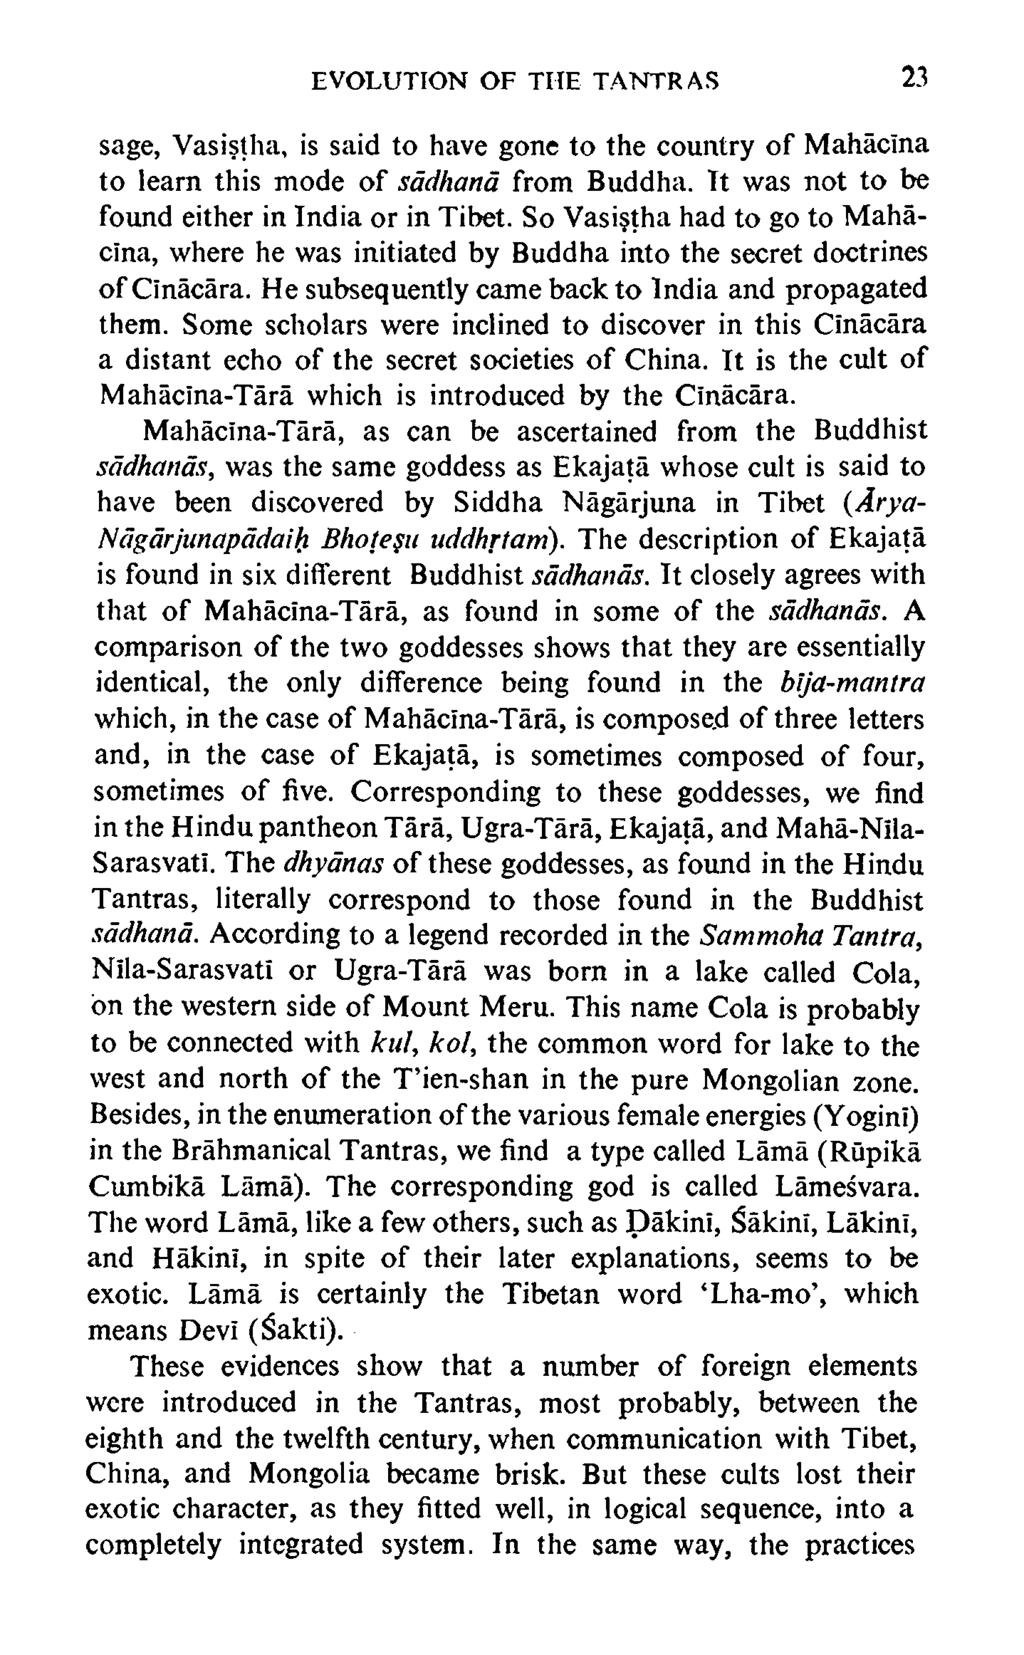 EVOLUTION OF TIIE TANTRAS 23 sage, Vasistha, is said to have gone to the country of Mahaclna to learn this mode of sadhana from Buddha. Tt was not to be found either in India or in Tibet.